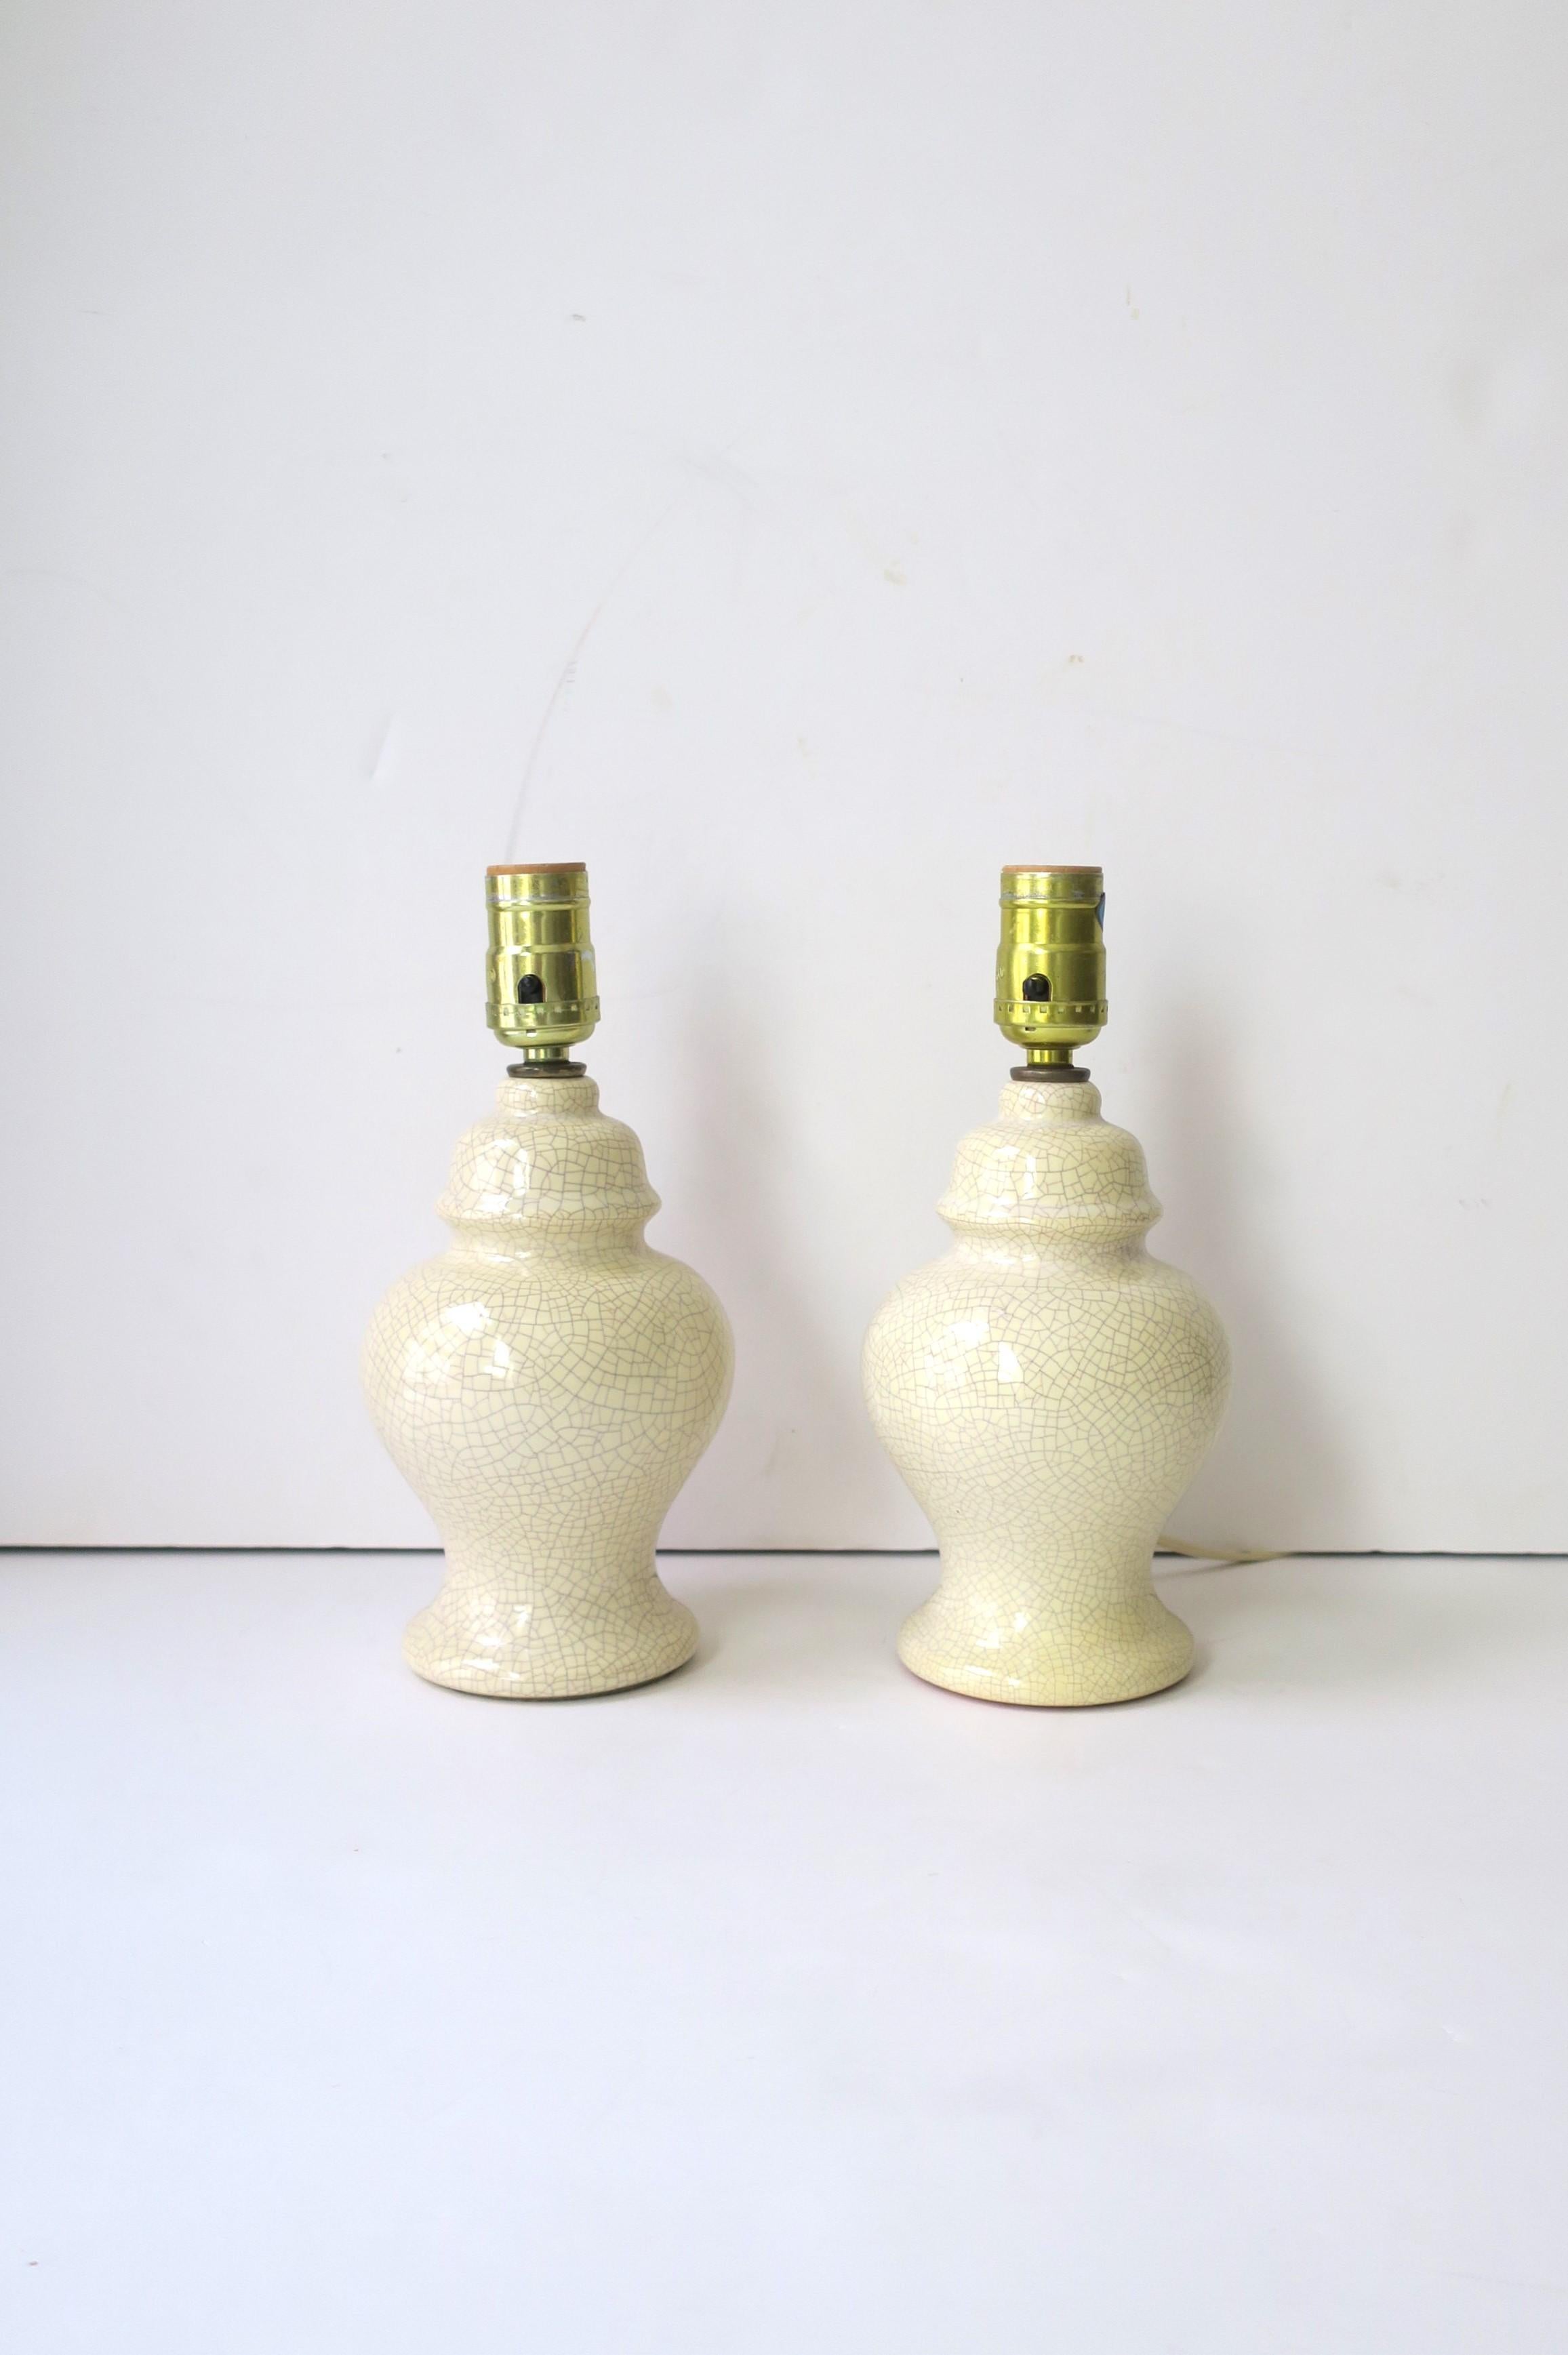 A pair of ceramic ginger jar table lamps, in the Asian Chinese style, circa mid to late-20th century, 1960s, 1970s. Ceramic hue is off-white/beige with a dark crackle. Cord is a nice length measuring. 85.5